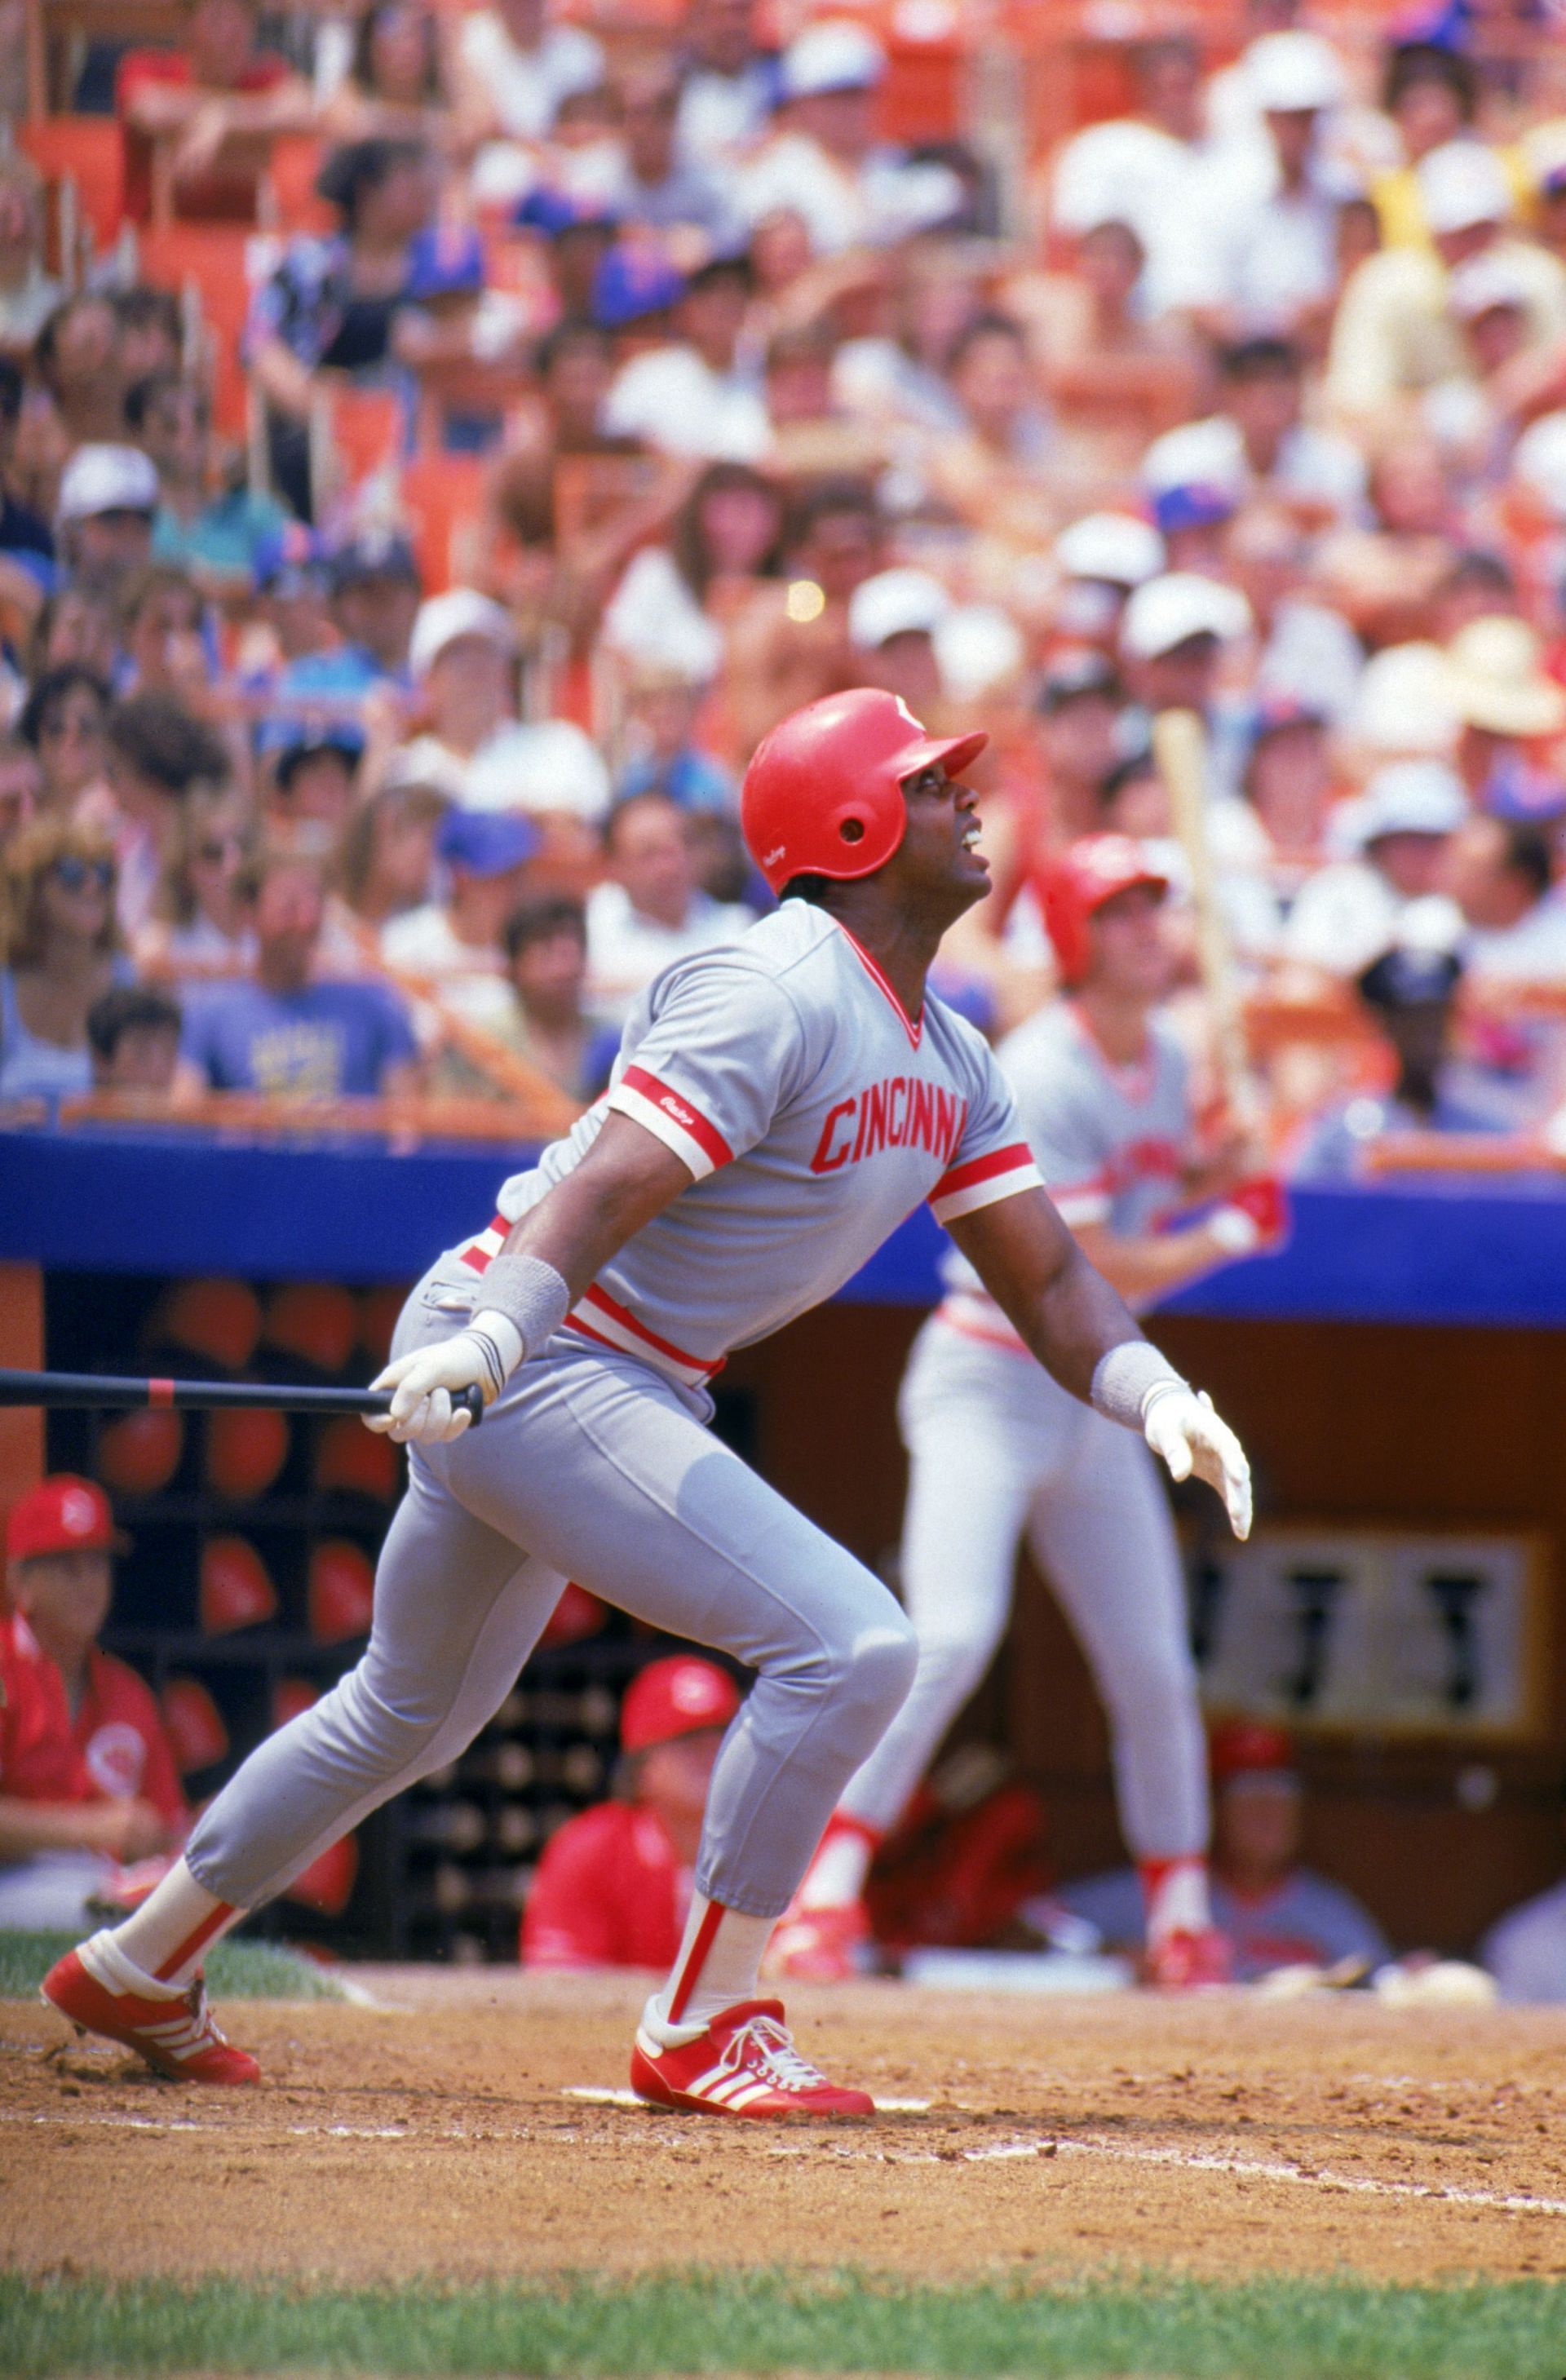 Dave Parker #39 of the Cincinnati Reds watches the flight of the ball as he follows through on his swing during a game with the New York Mets in 1987 at Shea Stadium in Flushing, New York.